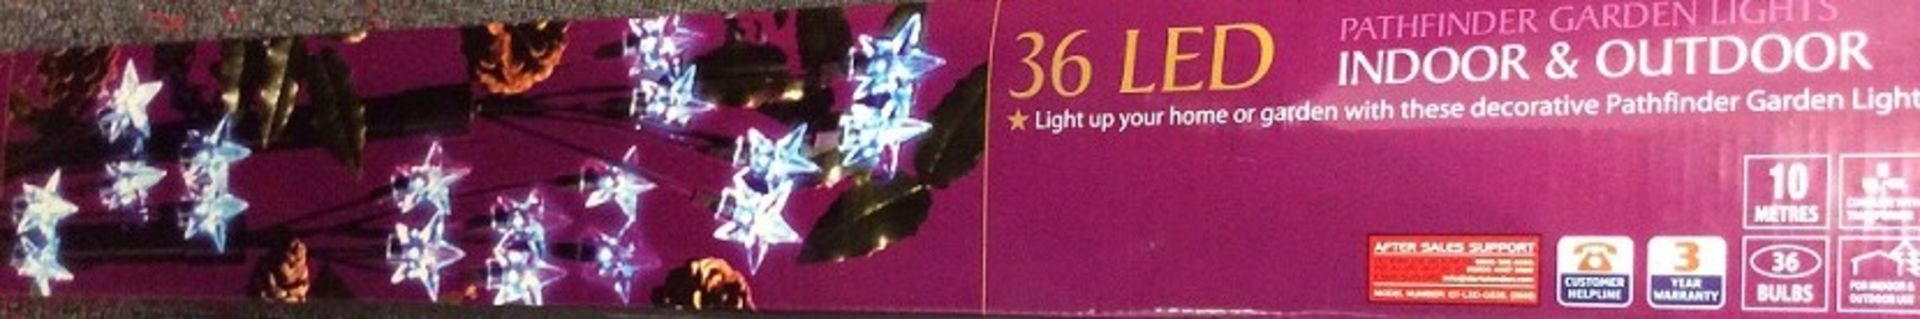 V Brand New Thirty Six Christmas Time LED Pathfinder Garden Star Lights-Indoor & Outdoor-10 Metres-